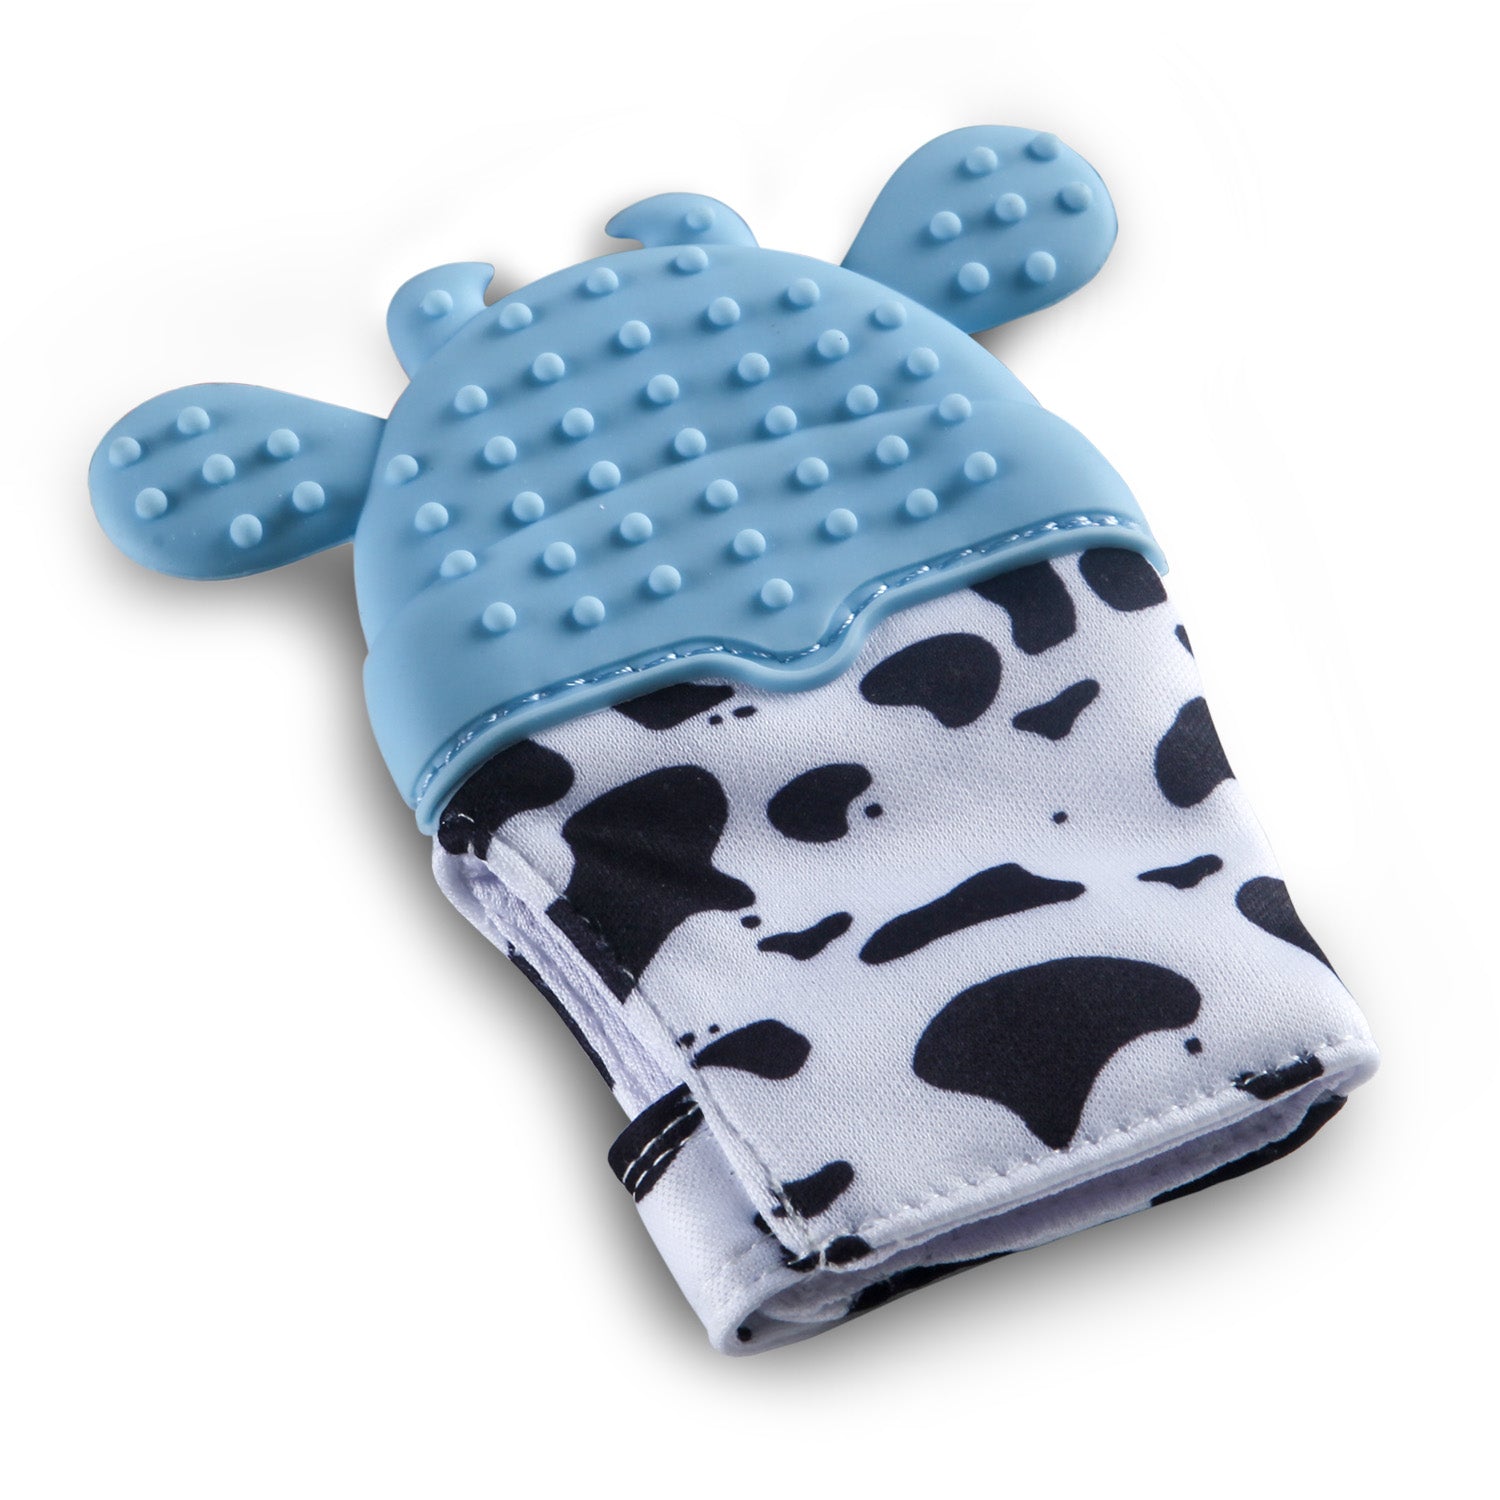 Teething Mitten Silicone Self Soothing Glove 1 Pc Cow Shape - Blue - Baby Moo